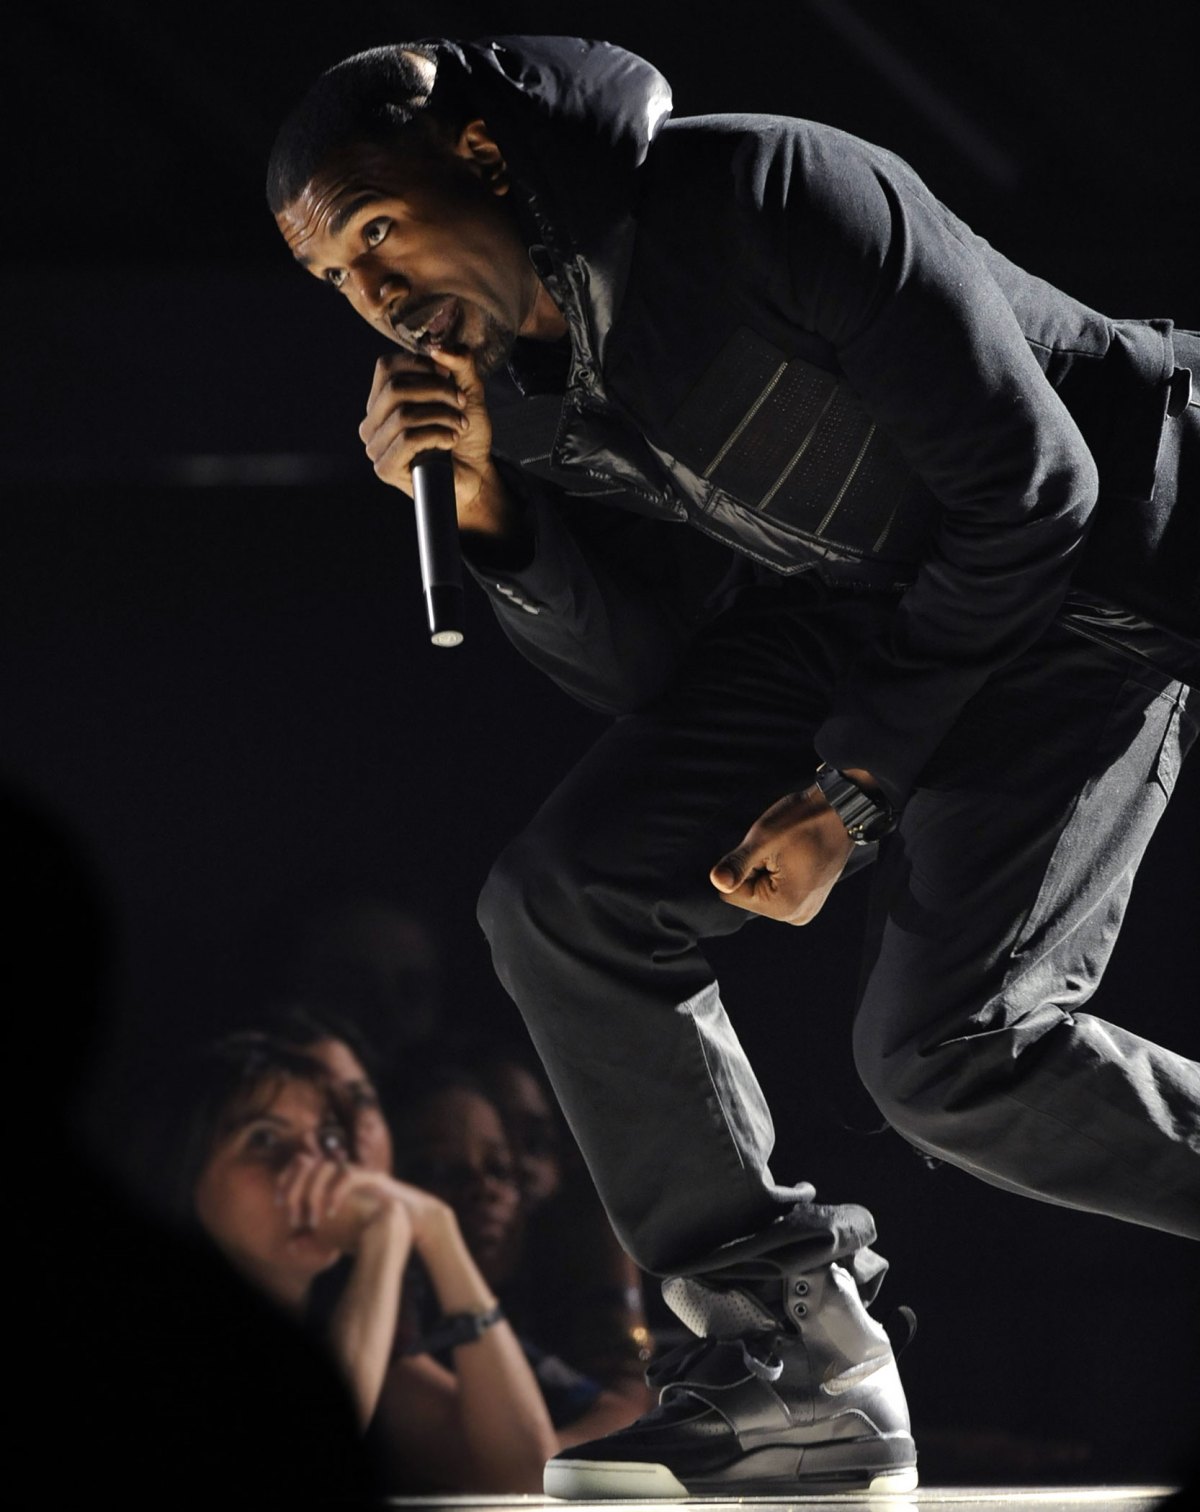 Kanye West 'Grammy Worn' Nike Air Yeezy 1s Sell for Record $1.8